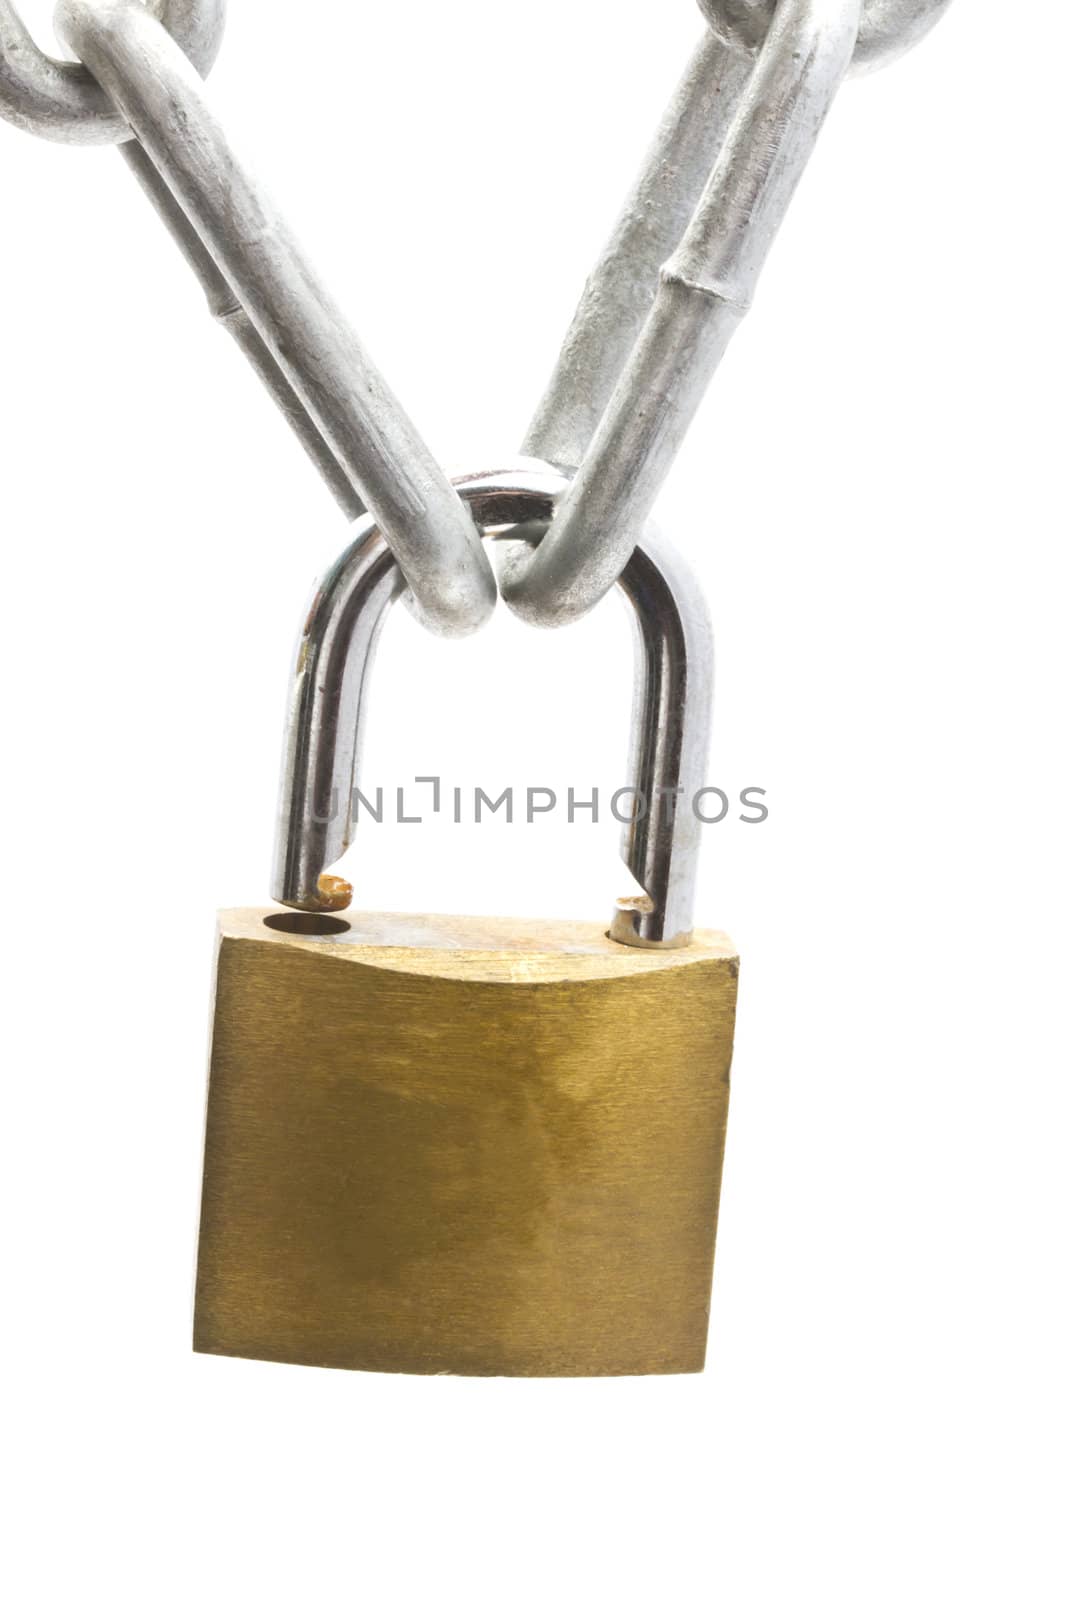 Padlock and chains closeup on white background 
